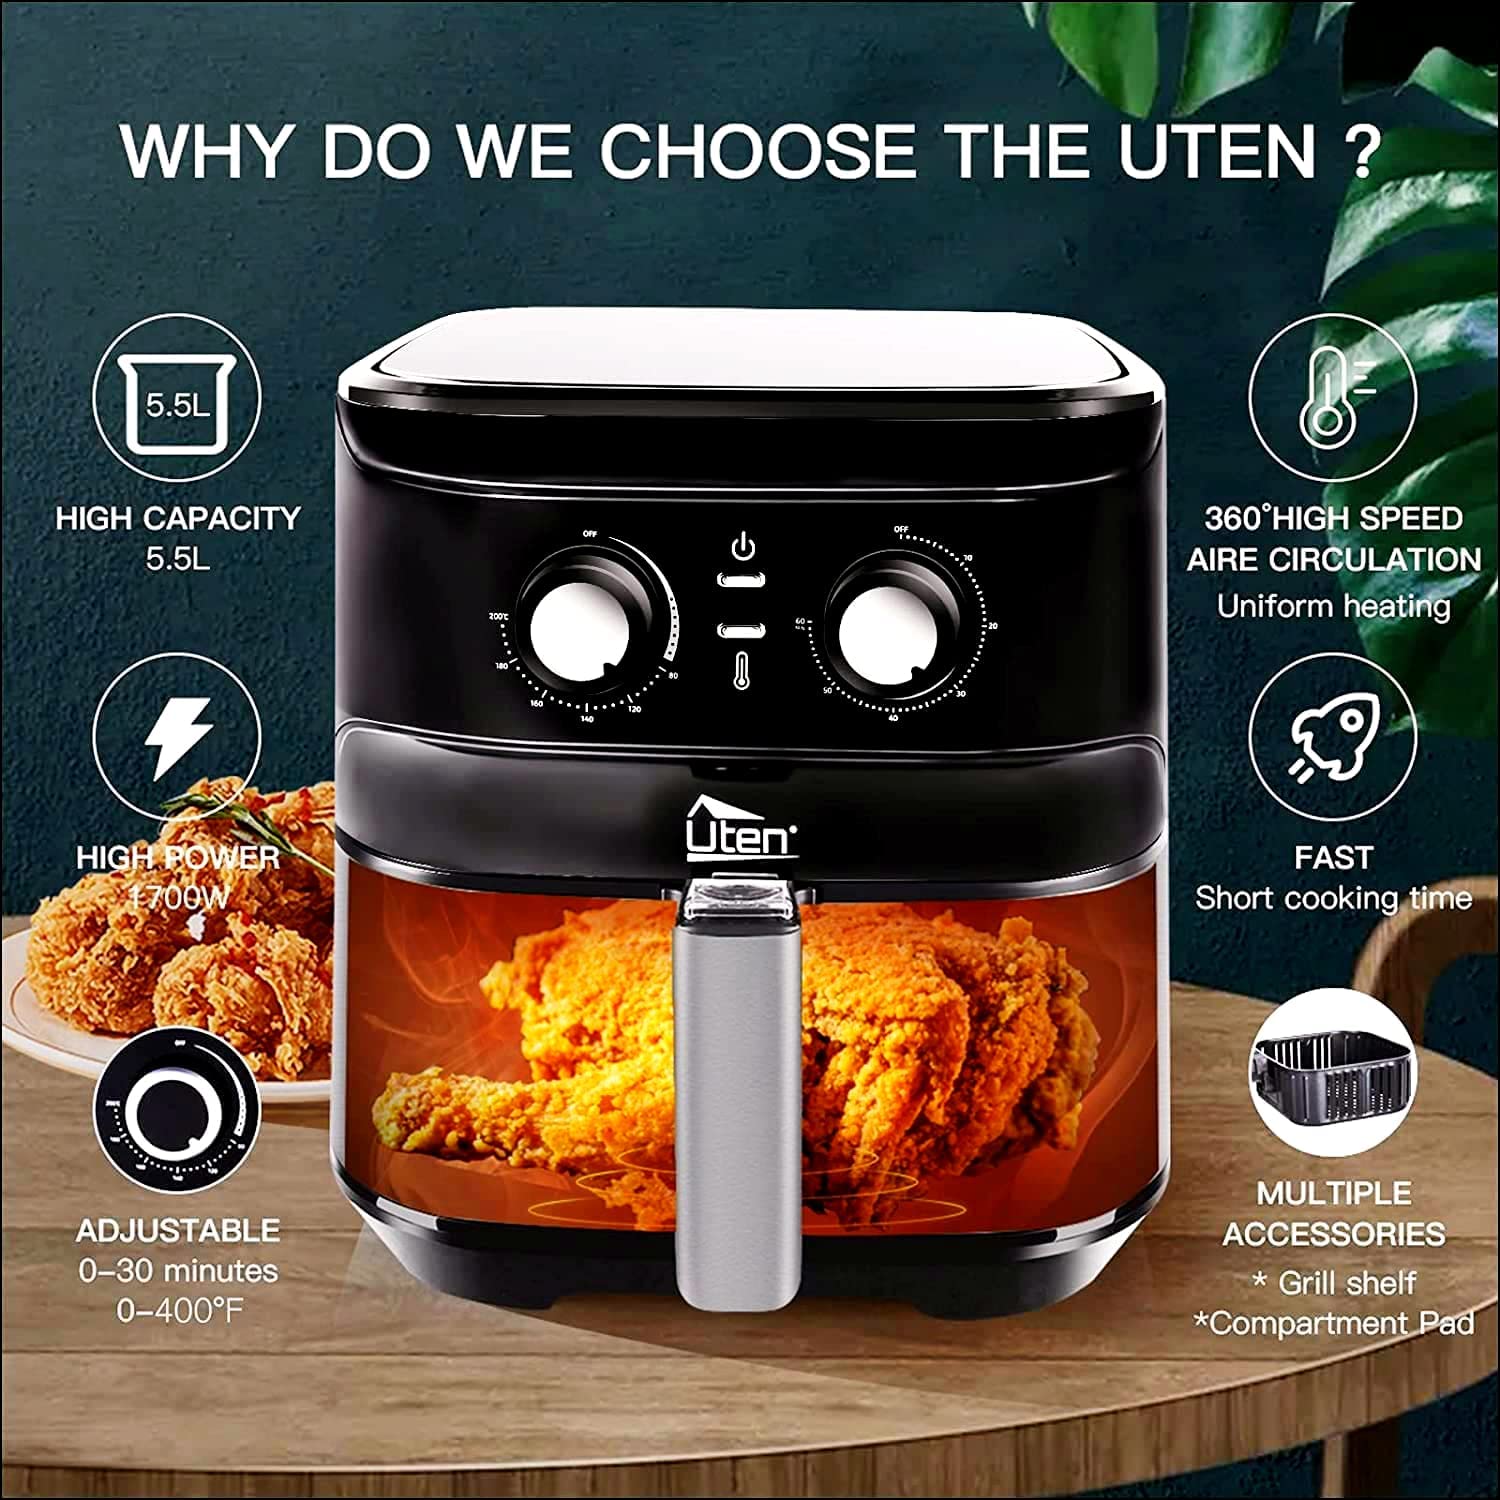 Air Fryer 5.8Qt/5.5L - Uten Electric Airfryer with Temperature Control, Timer, Non-Stick Fry Basket, 1700W High-power, Fast Oven Oilless Cooker, Dishwasher Safe - A Great Kitchen Assistant